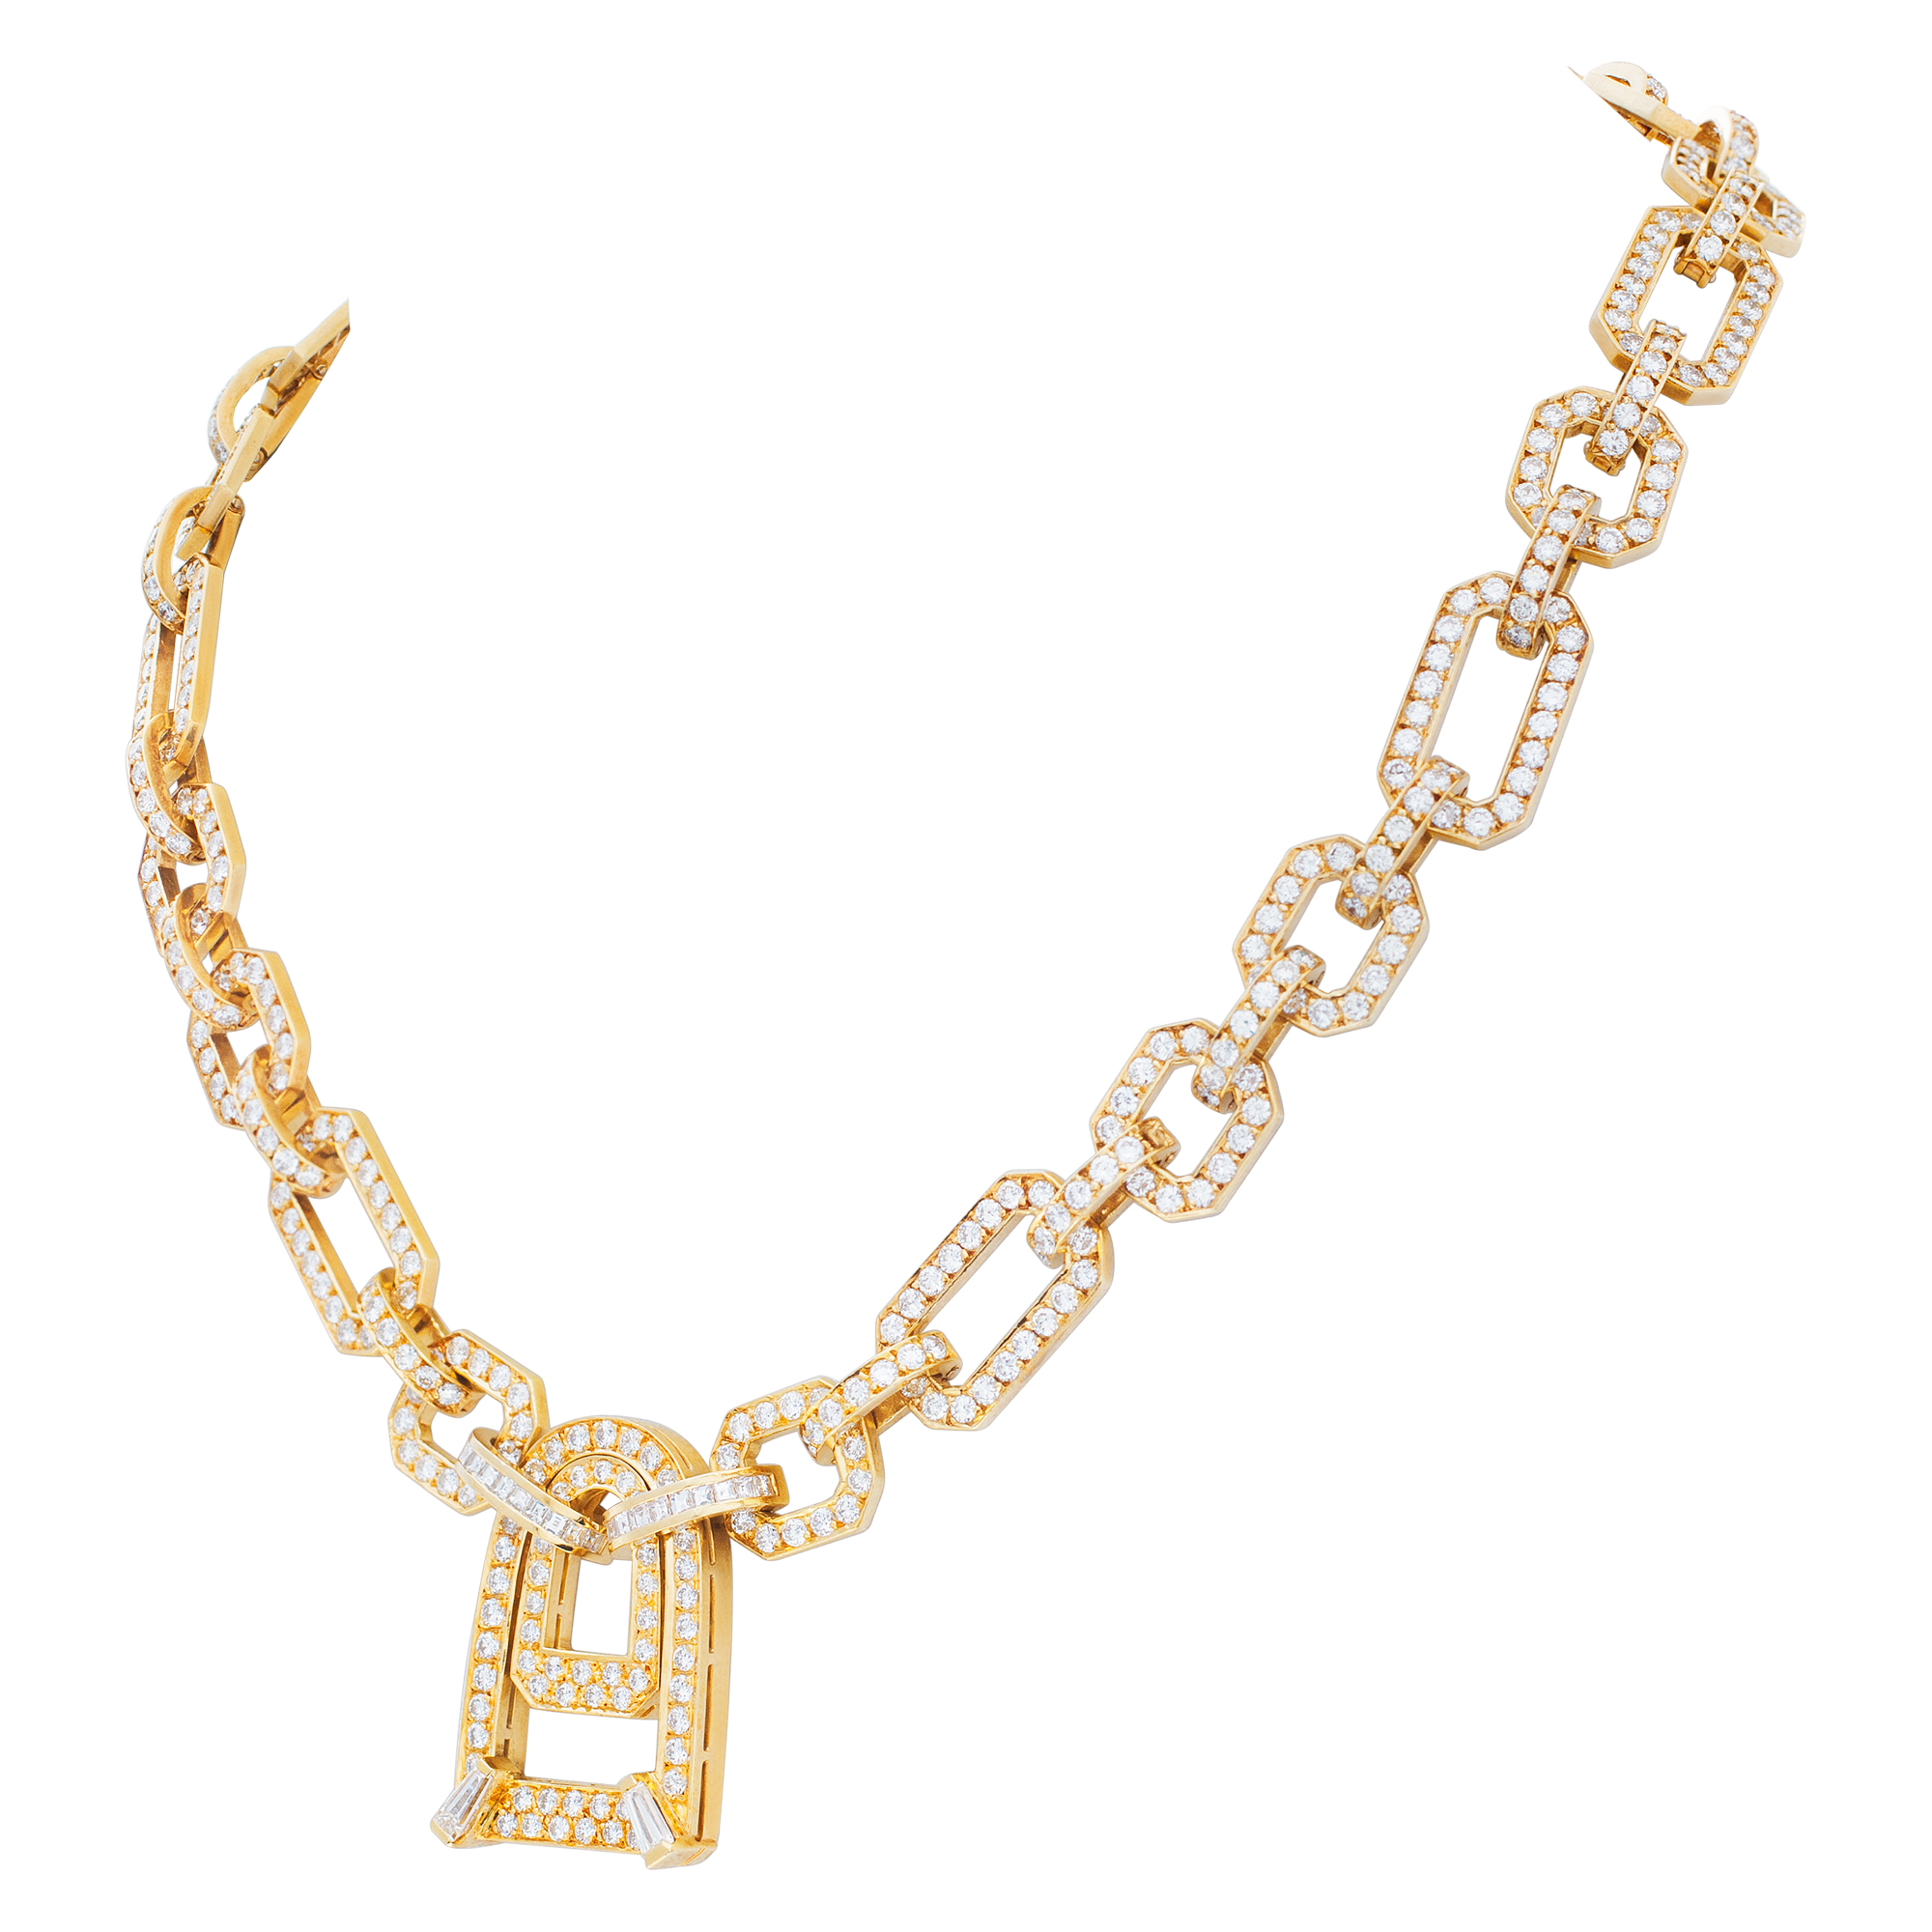 Chain link diamonds necklace set in 18K yellow gold with over 16 carats full round brilliant and baguette cut diamonds.15 inches. image 3